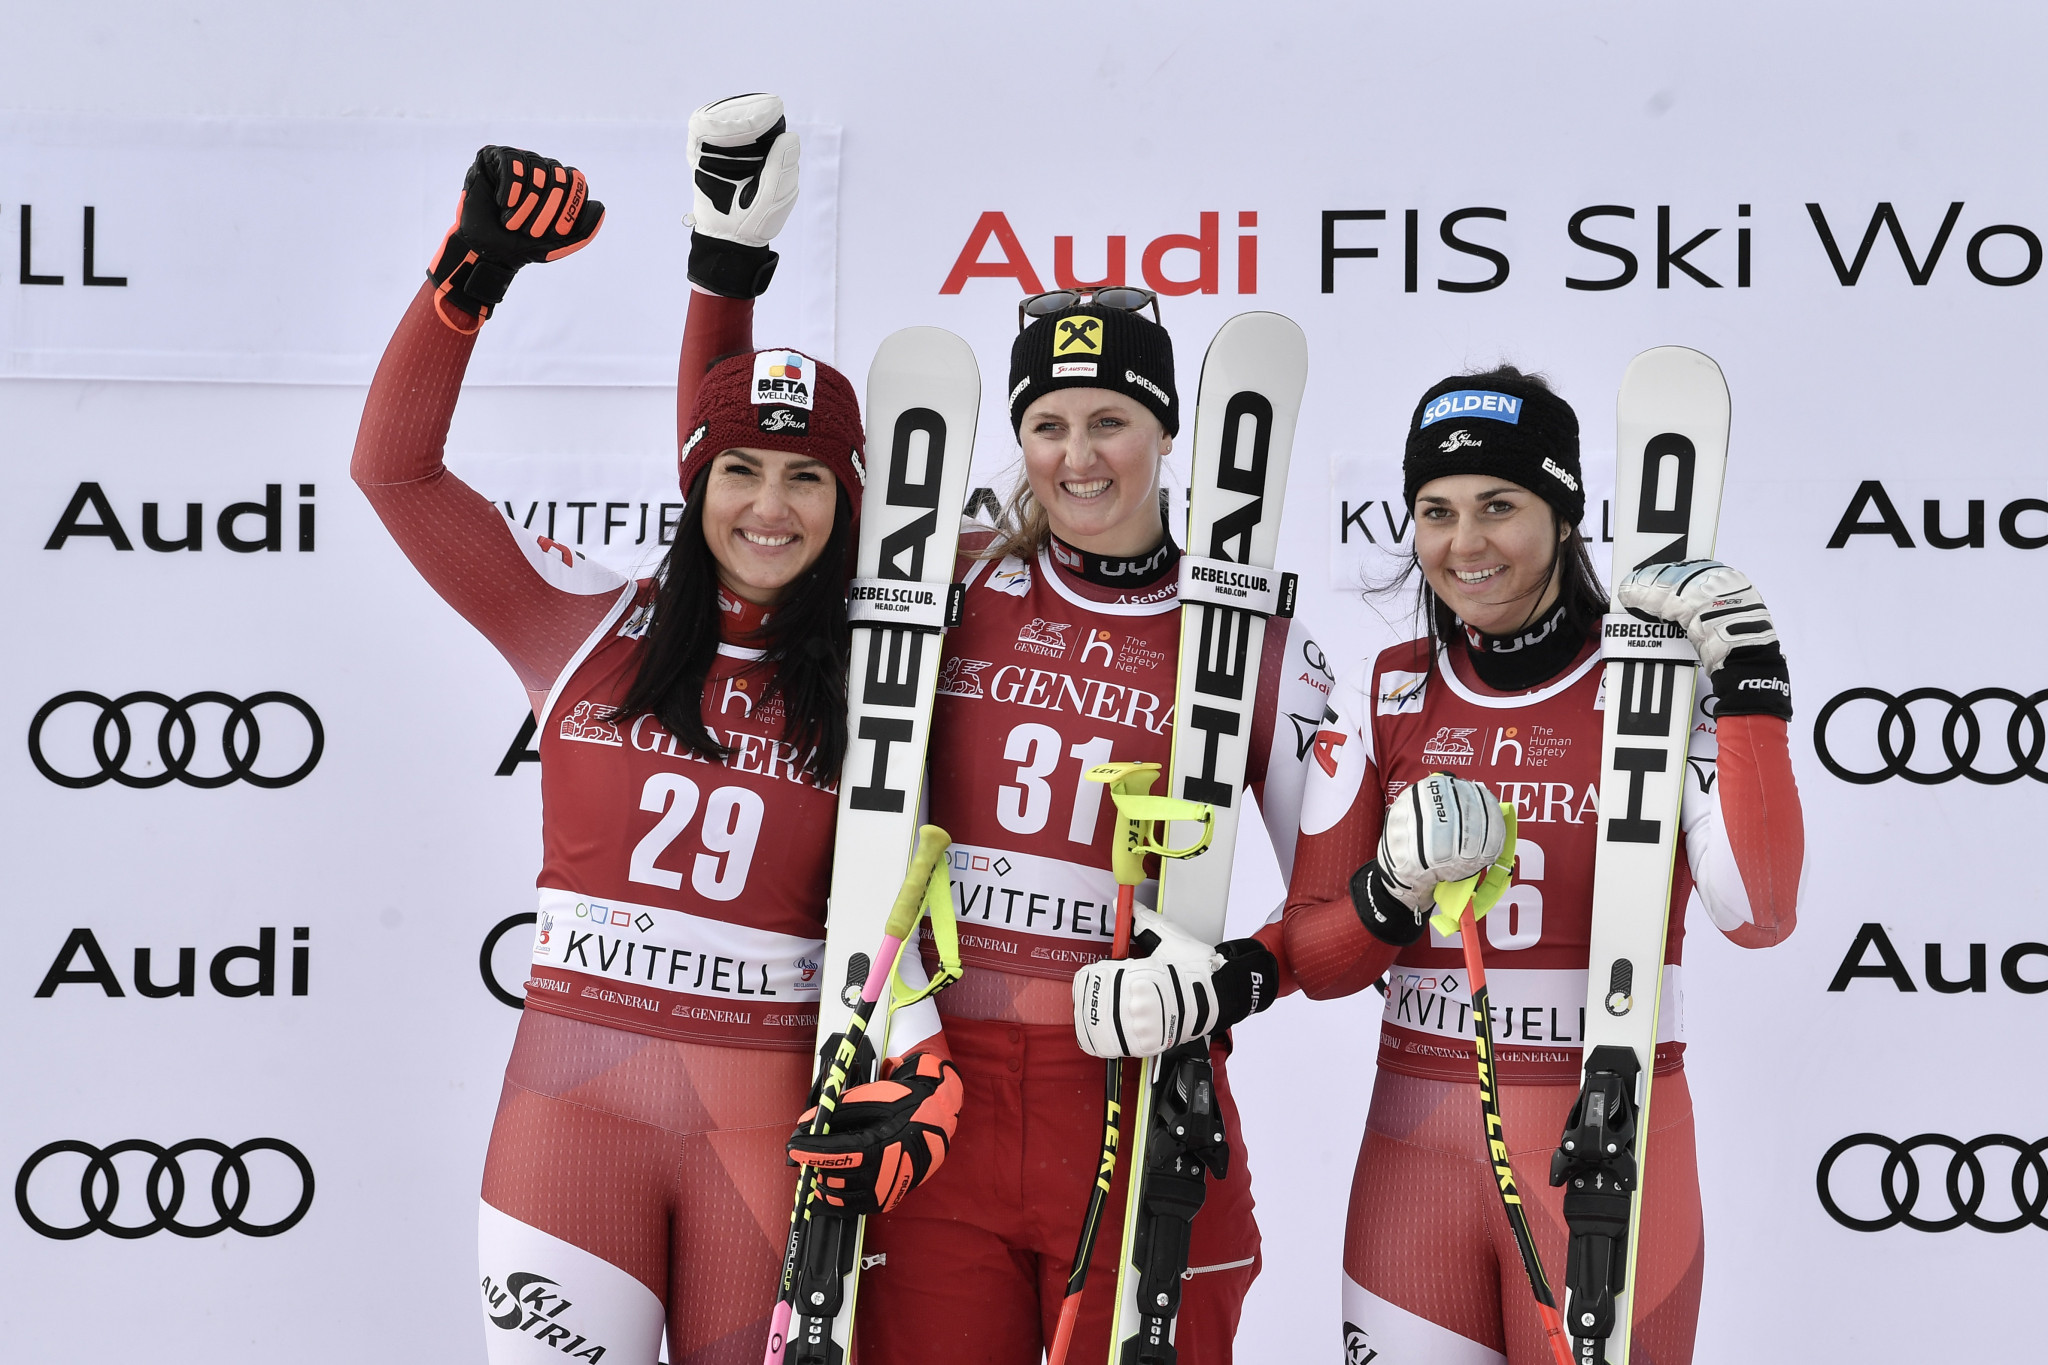 Nina Ortlieb, centre, led an Austrian podium sweep in the super-G at the Alpine Ski World Cup in Kvitfjell ©Getty Images